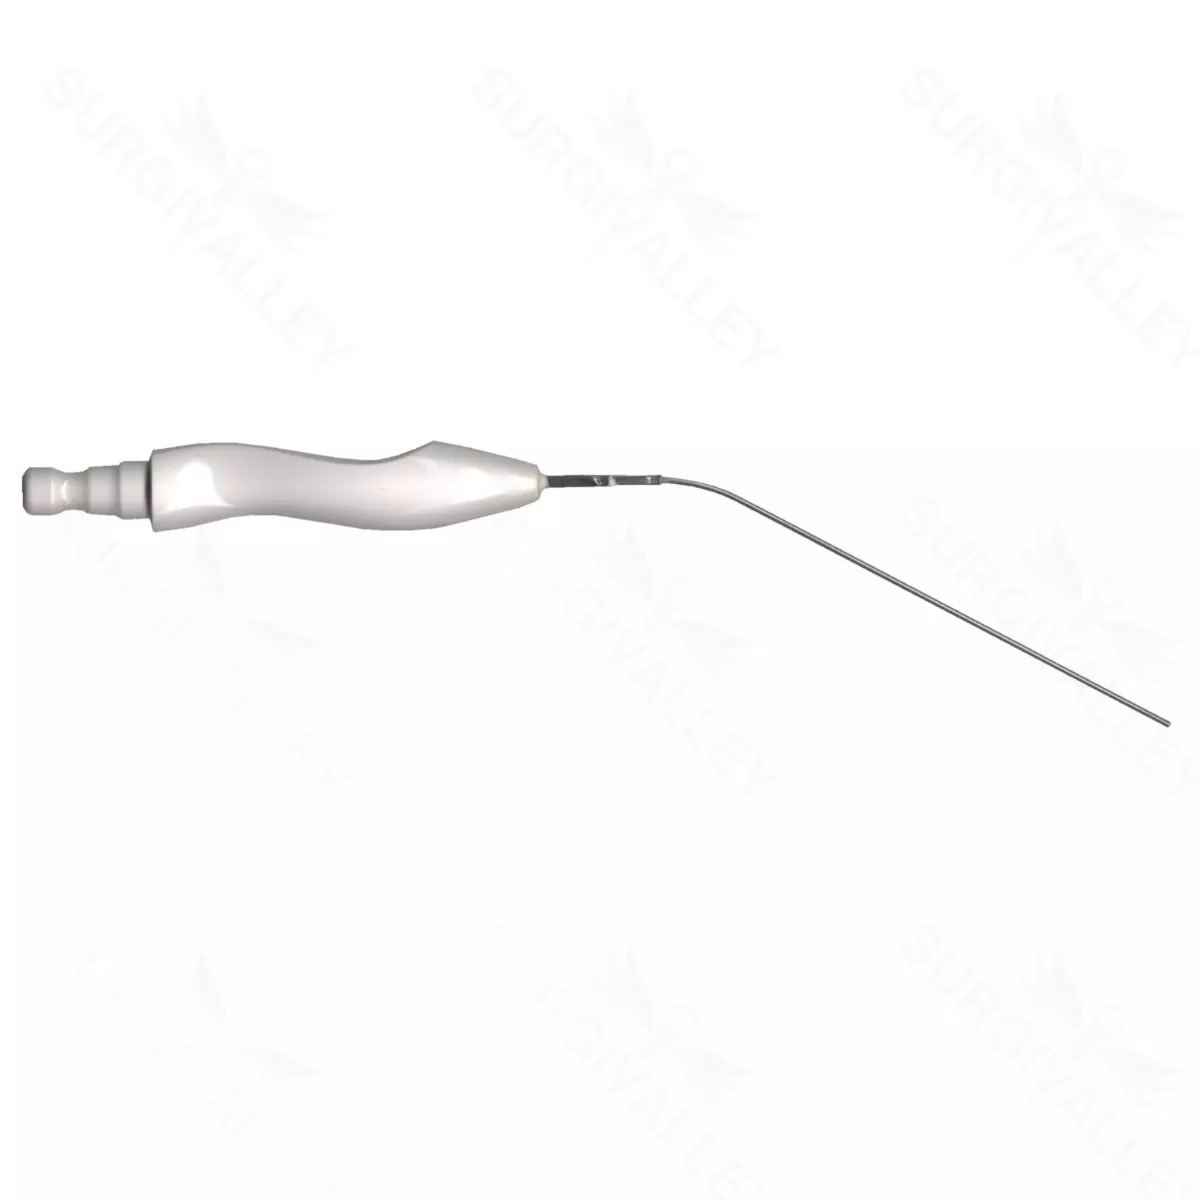 Single-Use Fine Frazier Suction 3fr 8cm Rounded Tip